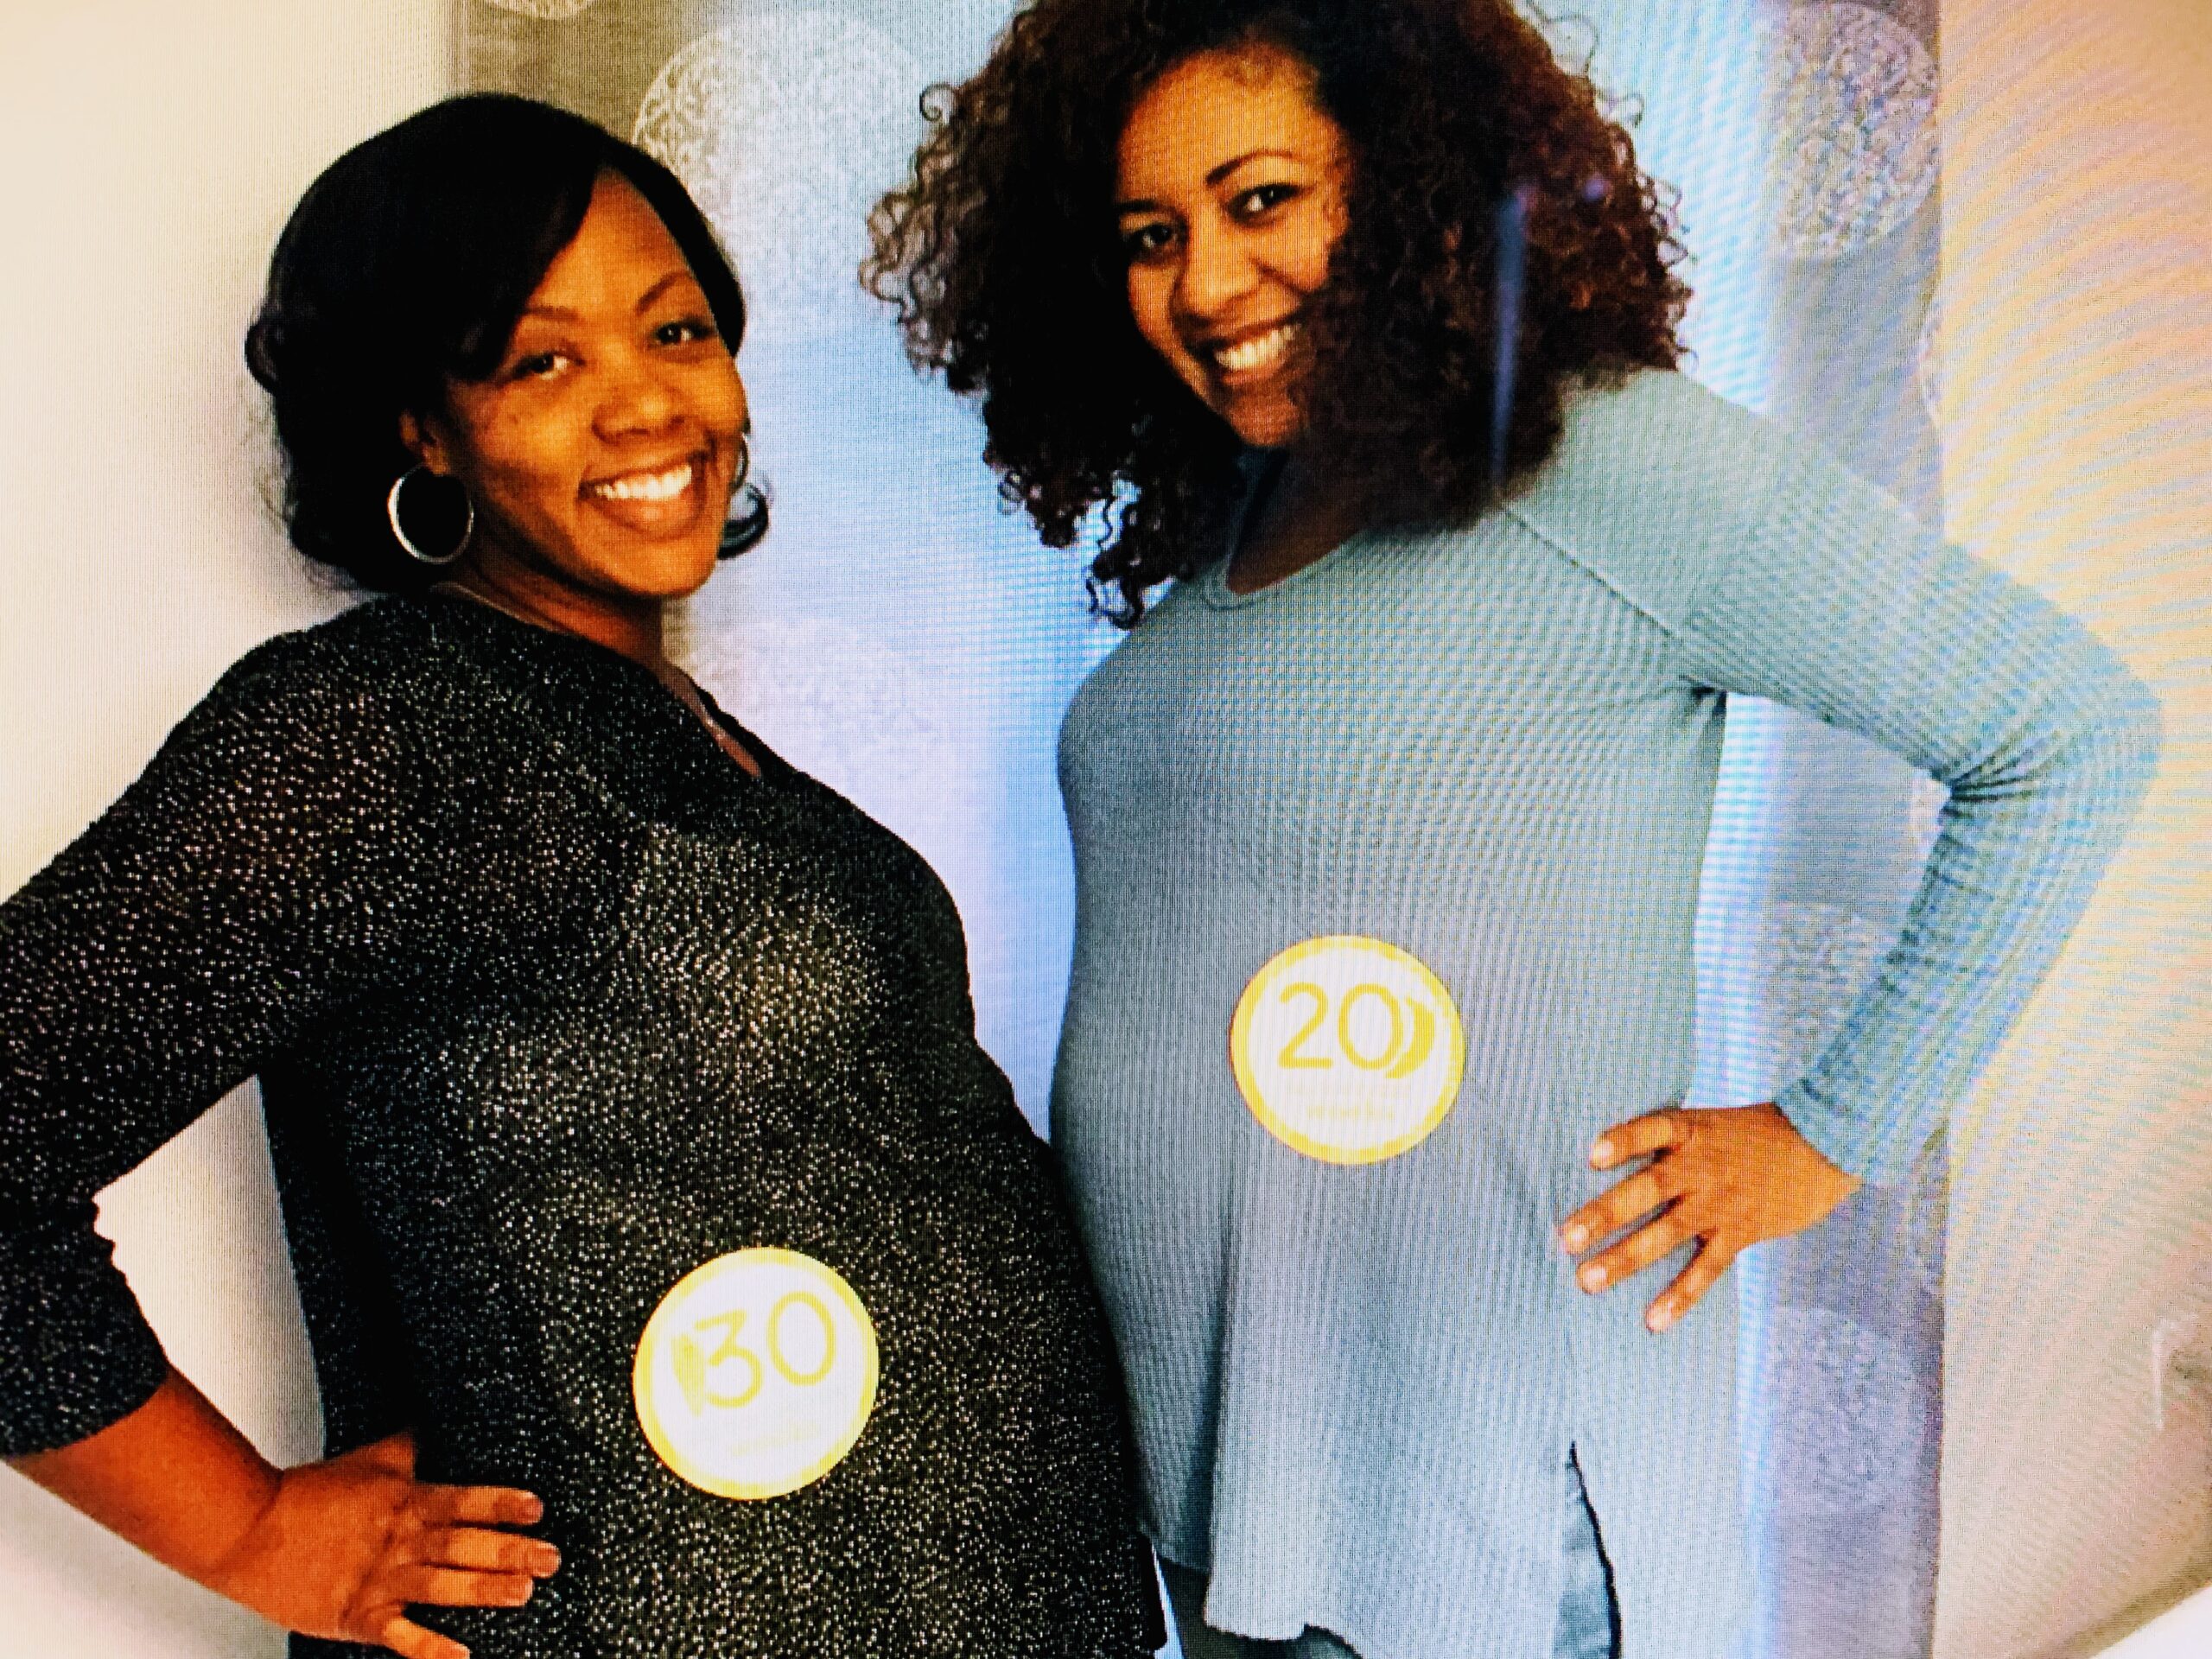 Shalon Irving and Bianca Pryor pose for a photo showing how far along they are in their pregnancies.